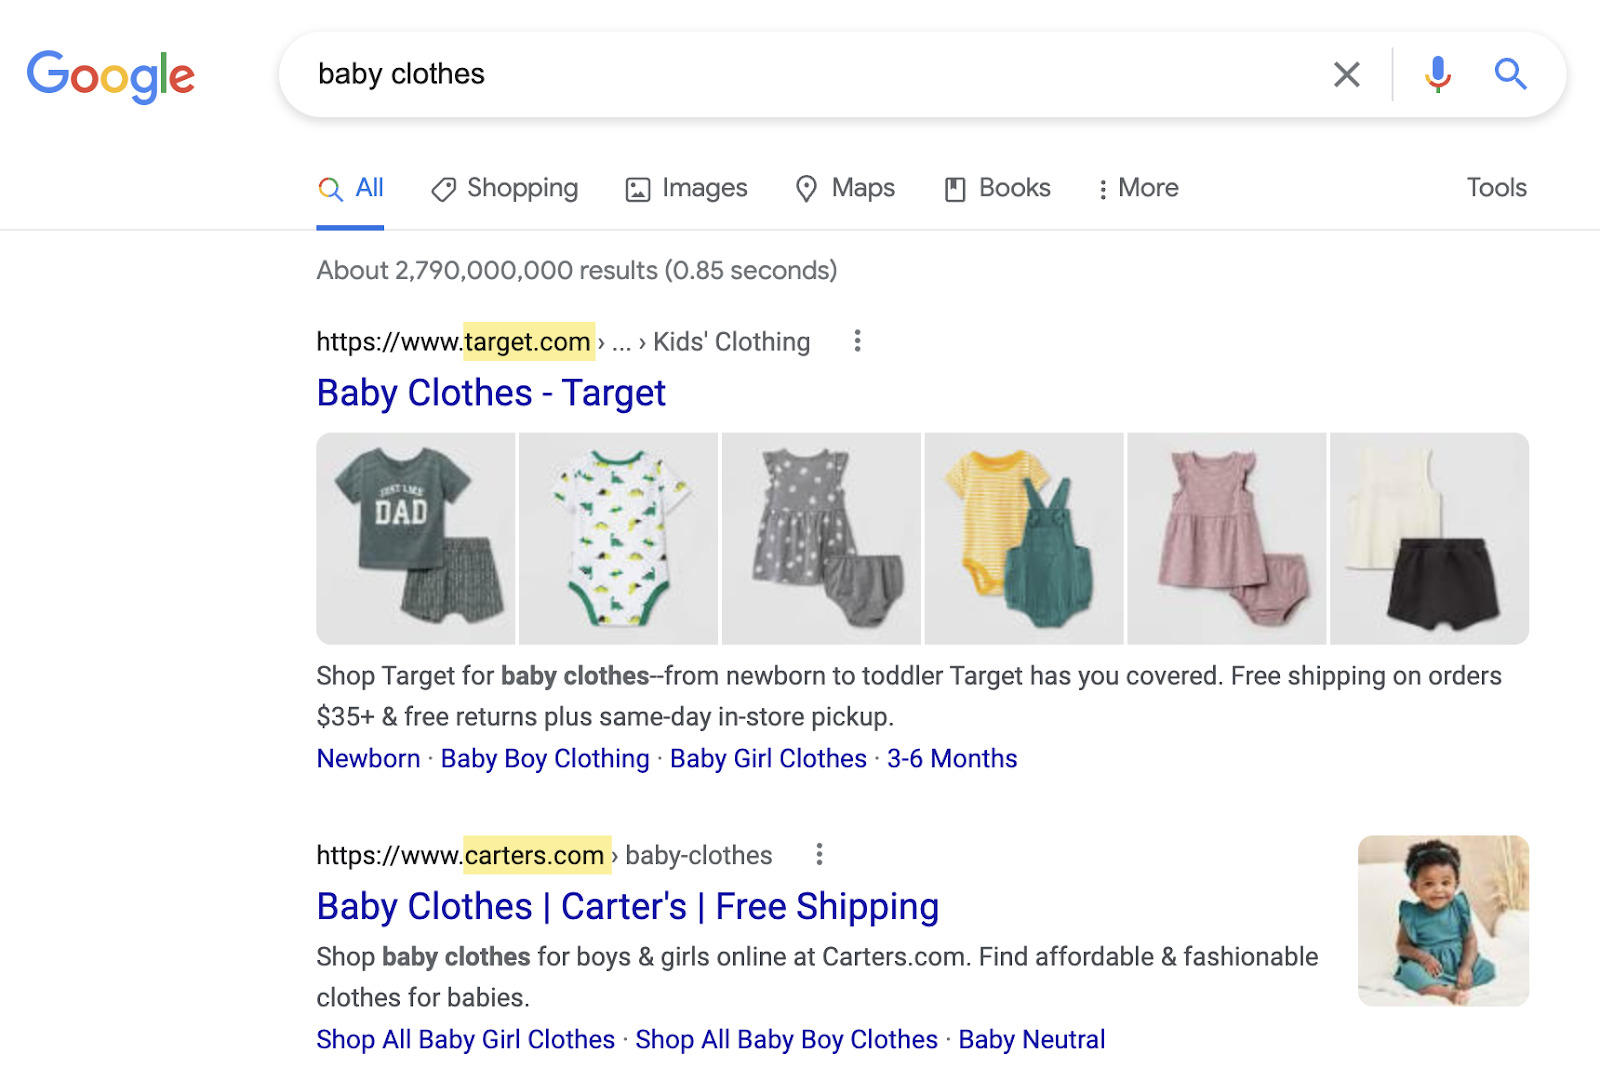 People searching for "baby clothes" want to buy